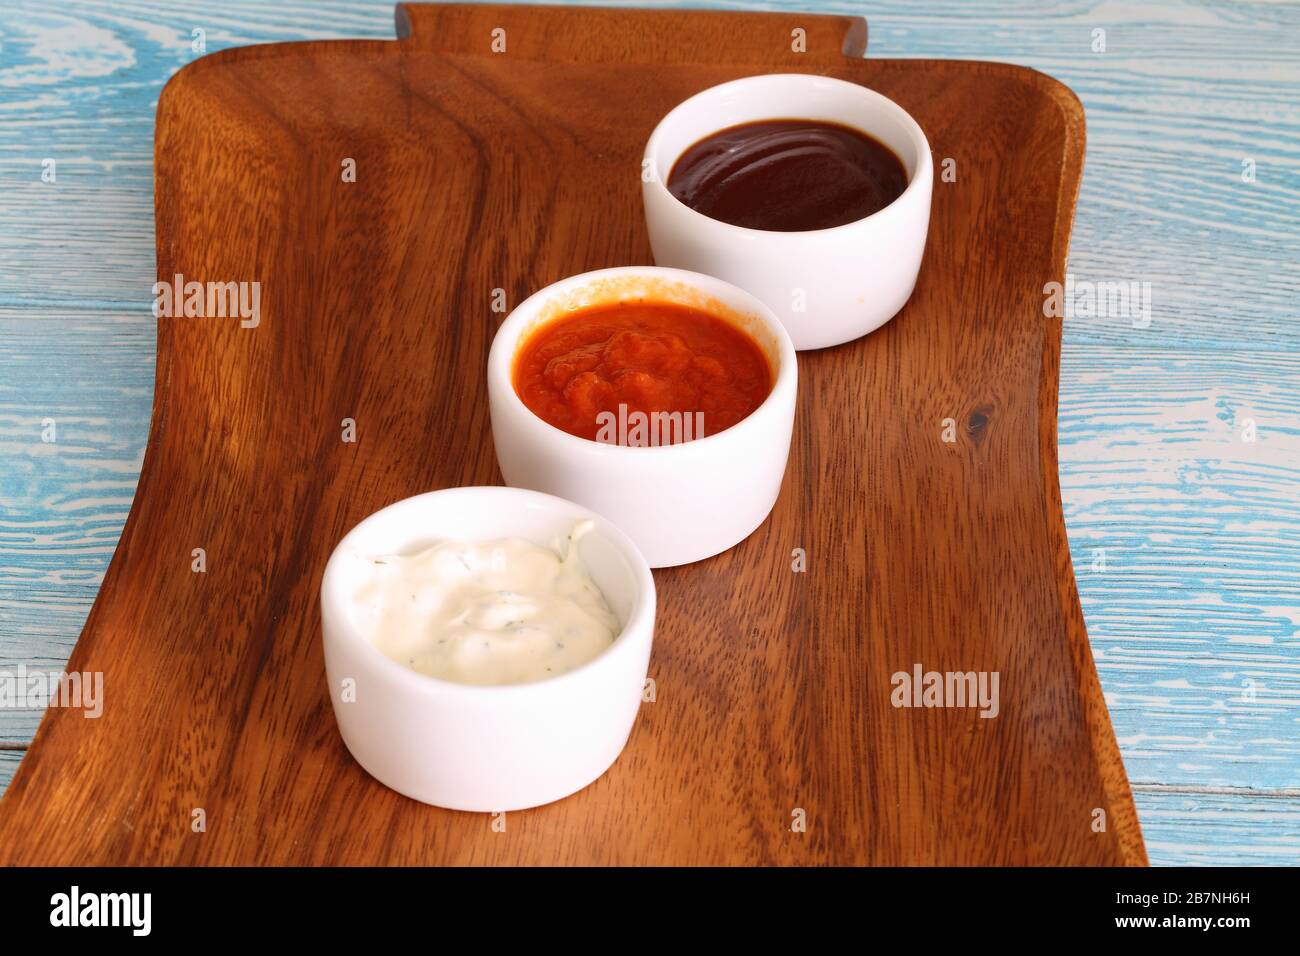 Assorted sauces Stock Photo